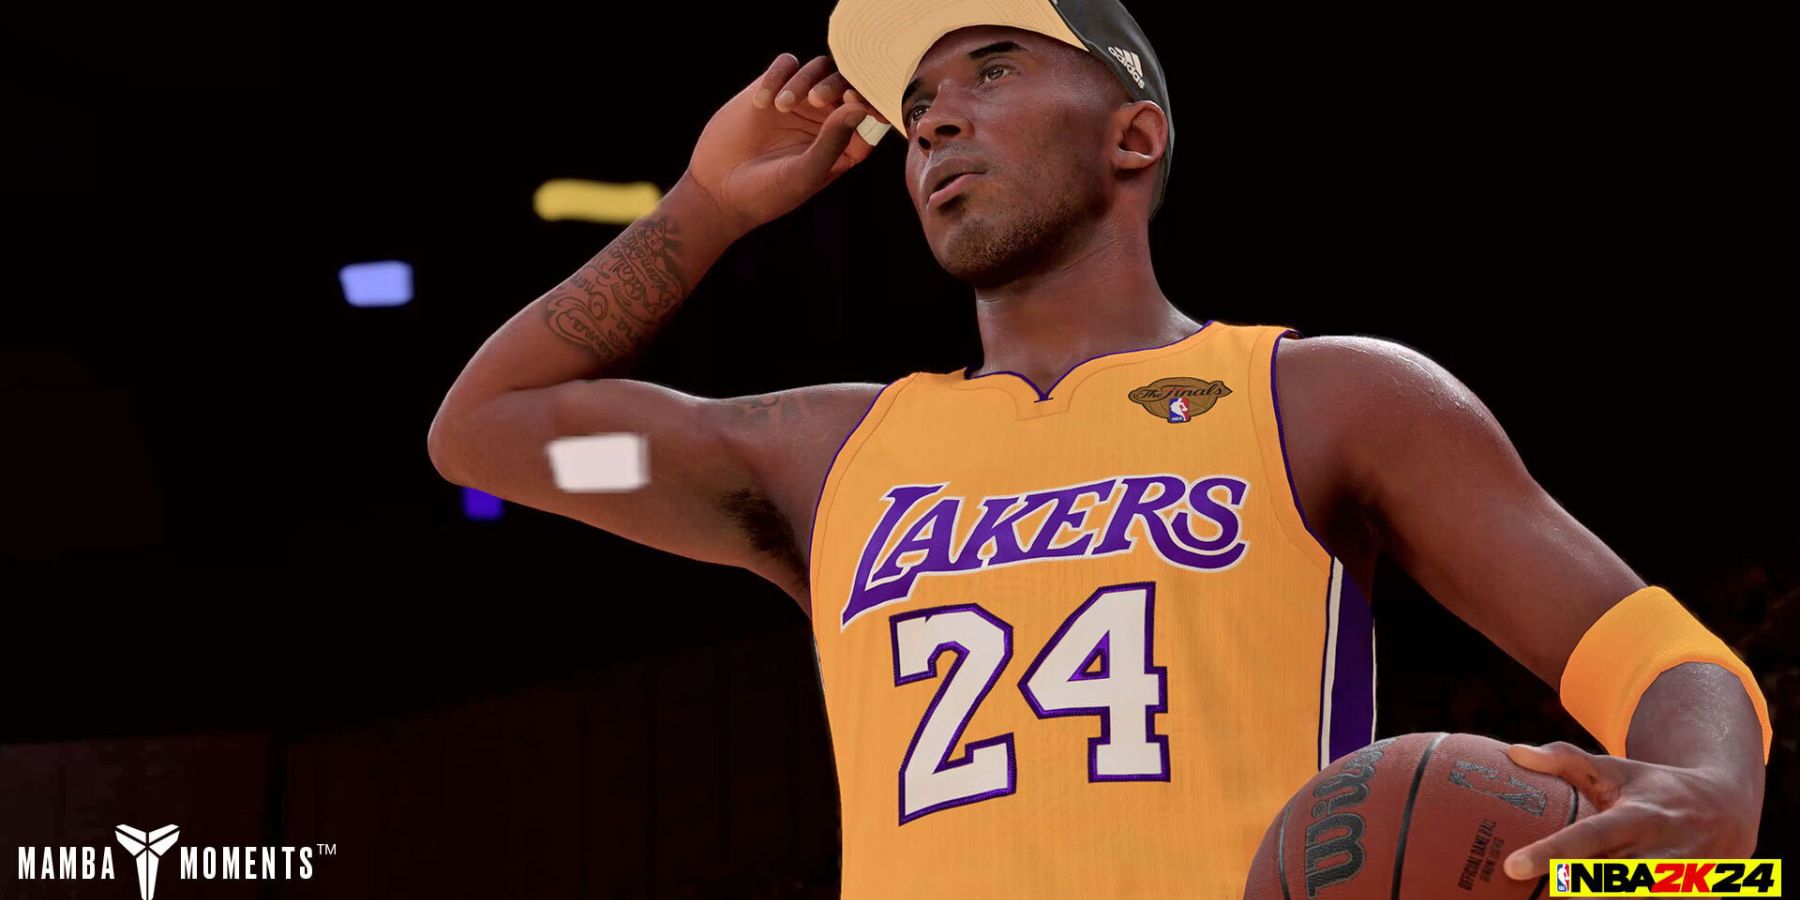 Negative Reviews Make NBA 2K24 Second-Worst Game on Steam